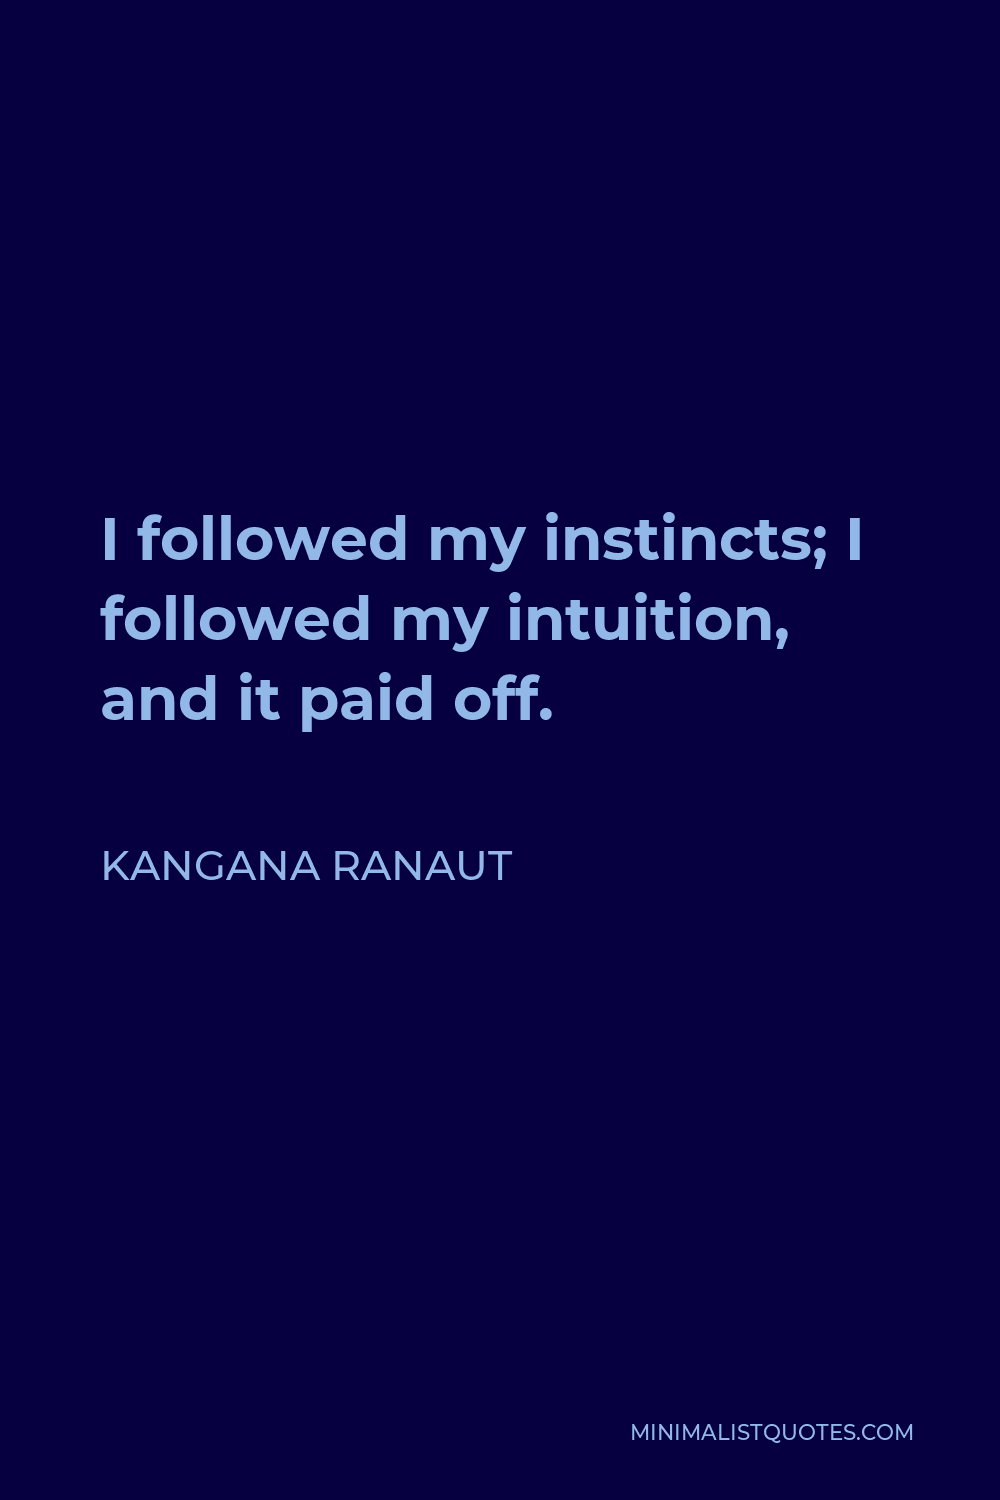 Kangana Ranaut Quote - I followed my instincts; I followed my intuition, and it paid off.